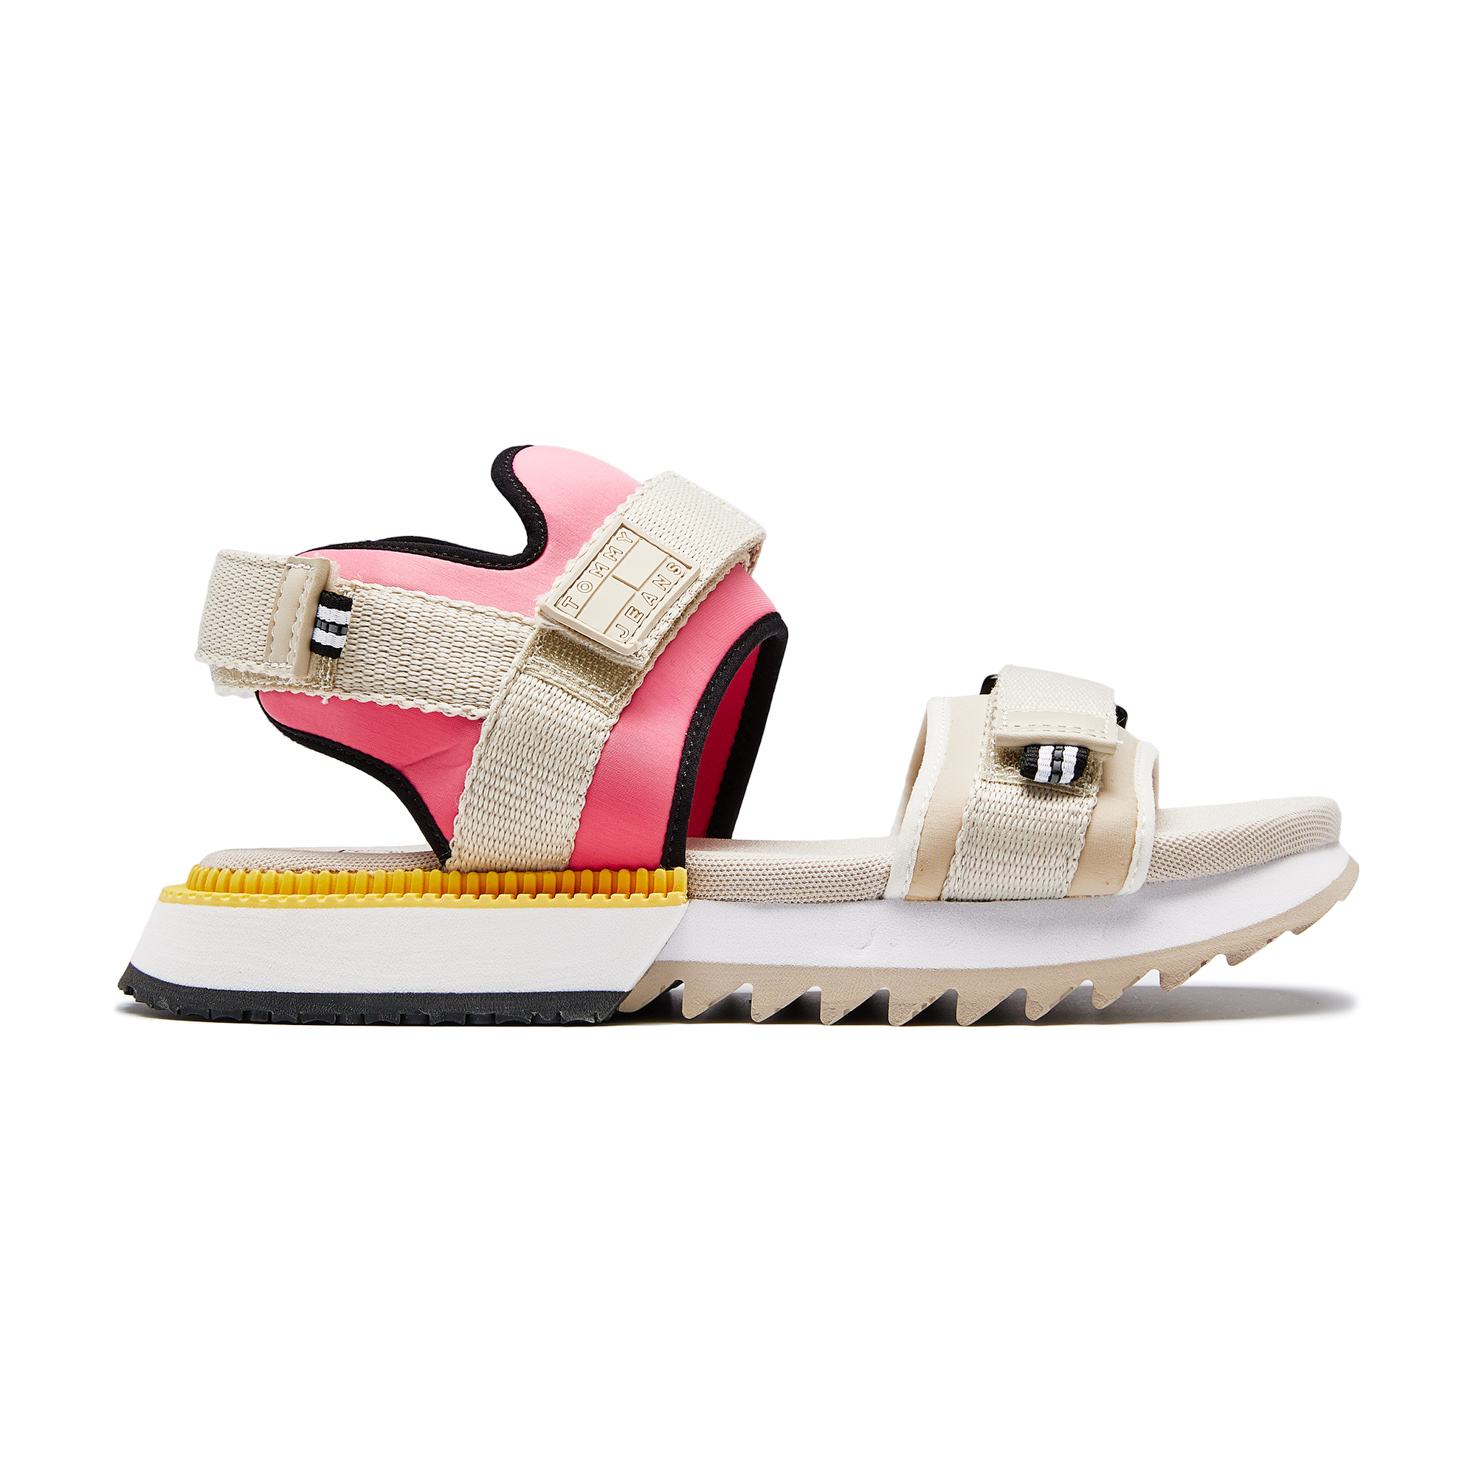 THE CLEAT SANDAL